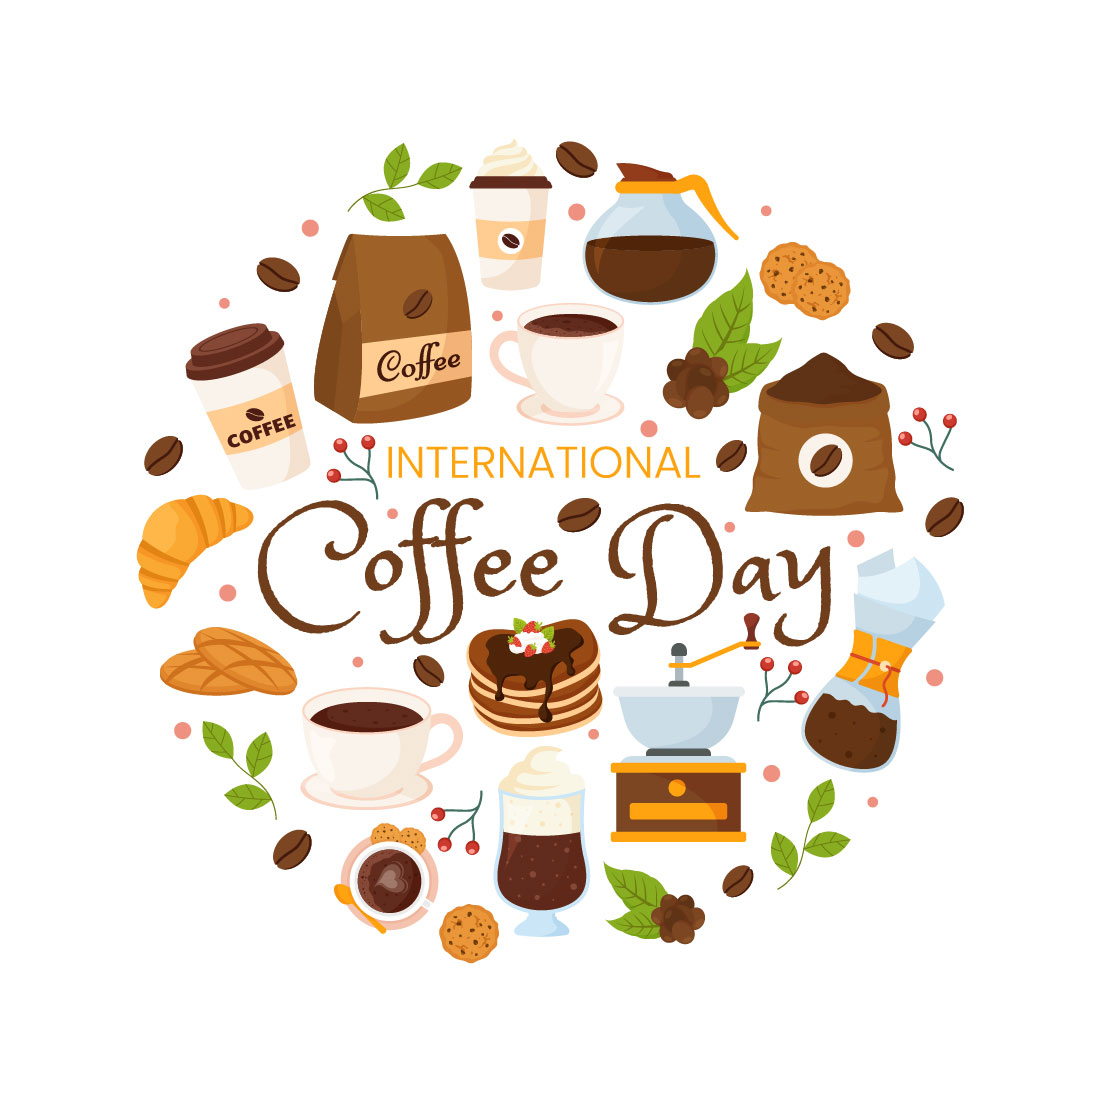 16 International Coffee Day Illustration preview image.